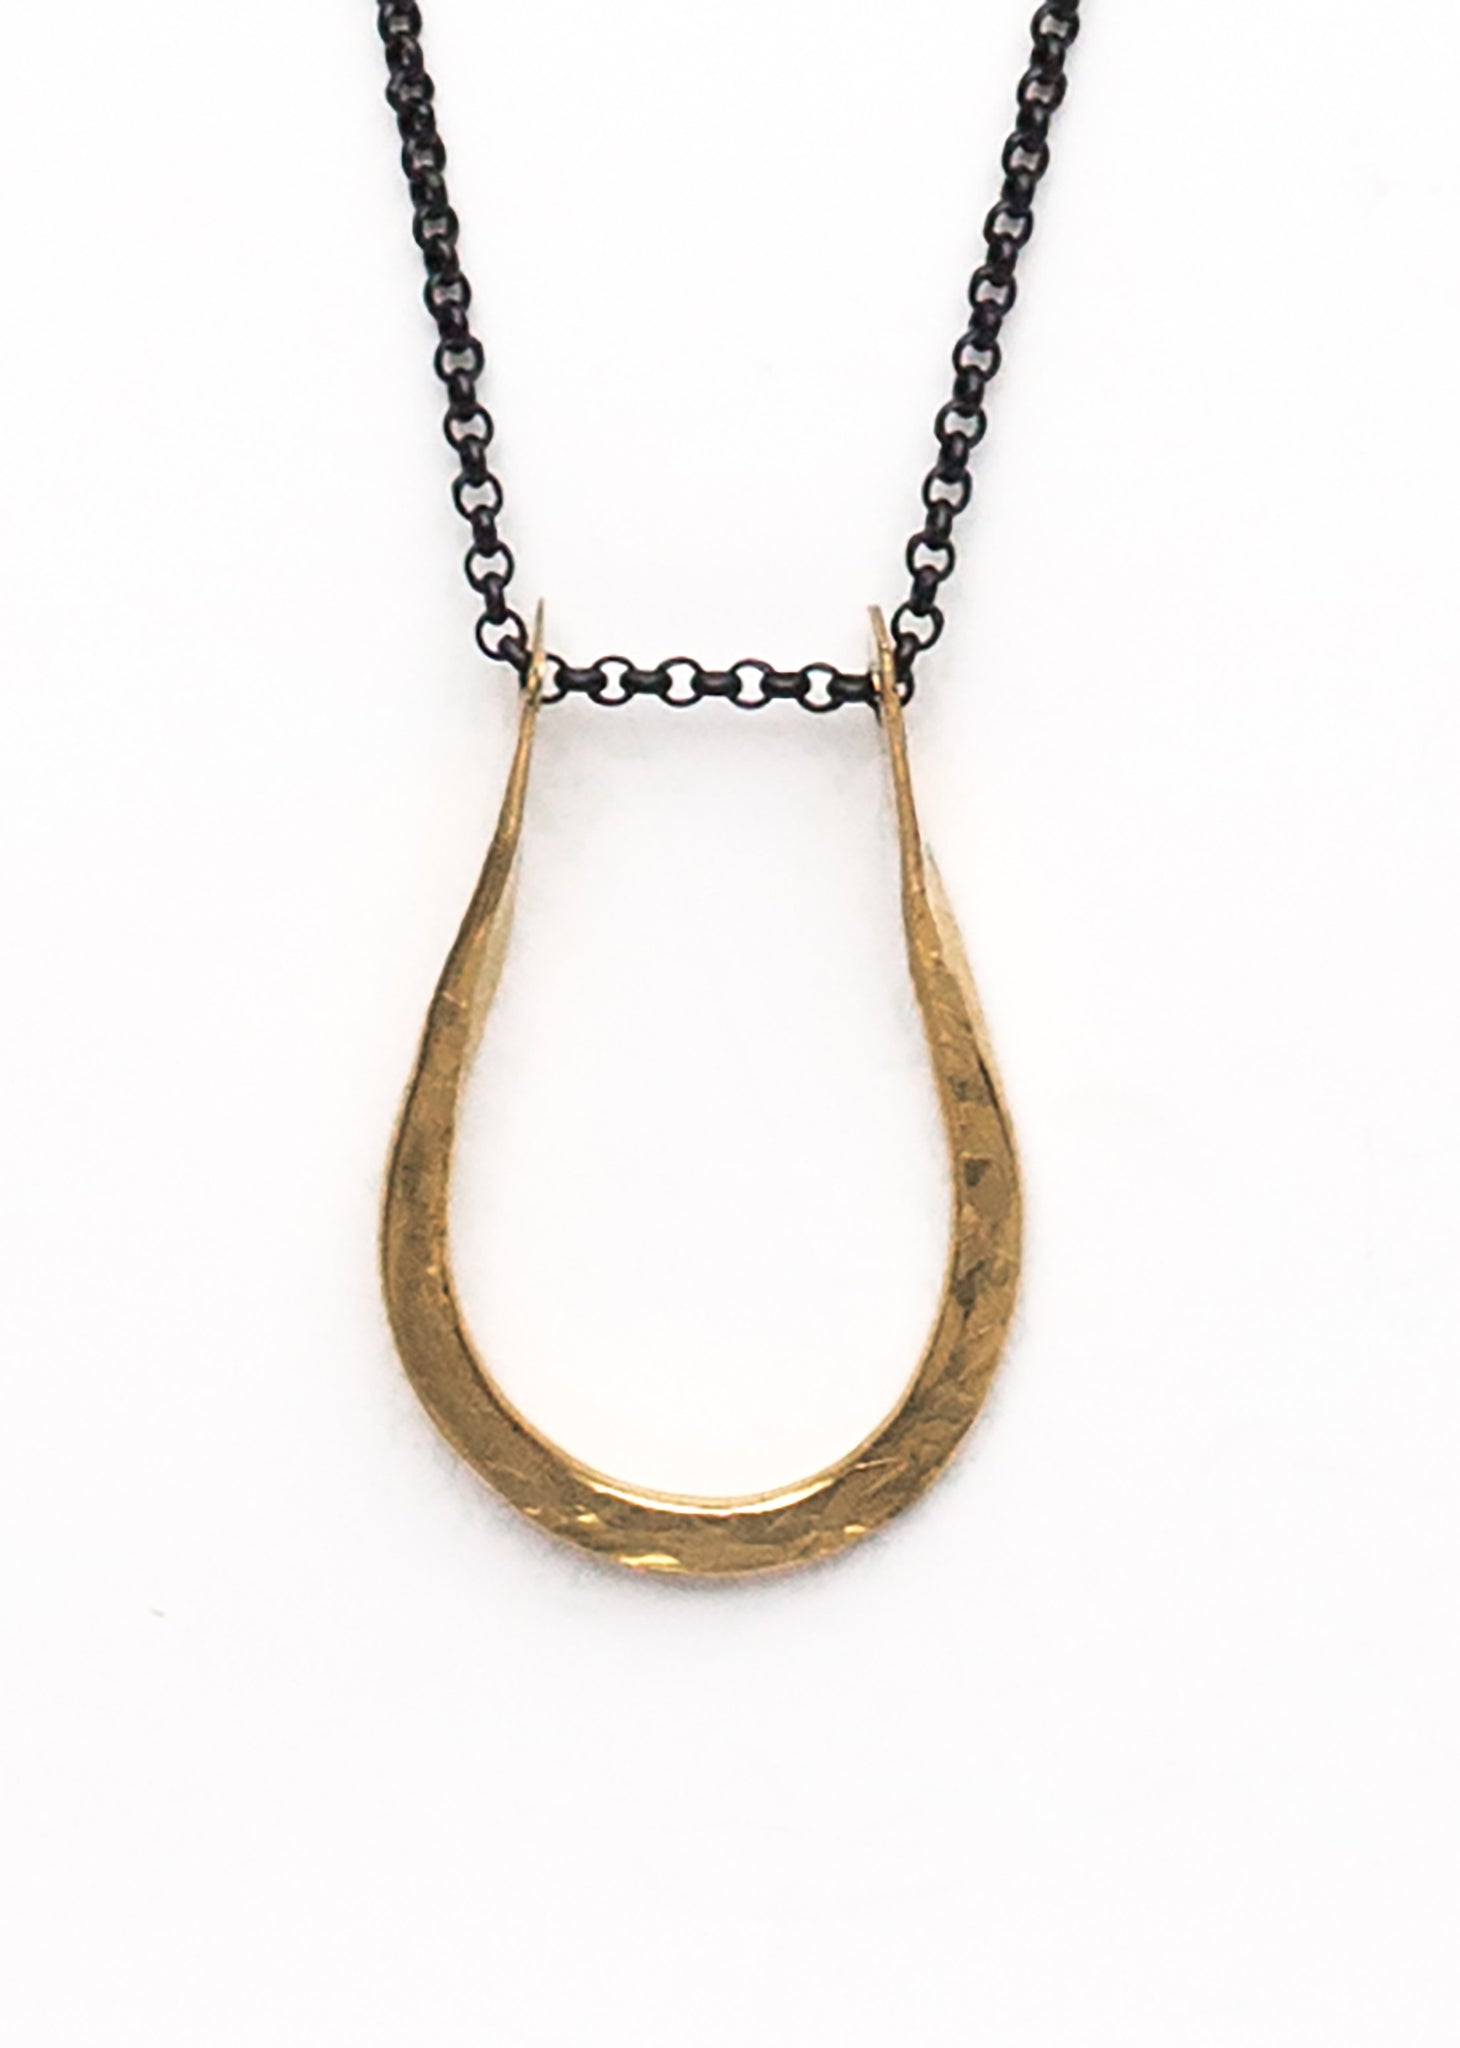 Pinched “U” Necklace on Black Chain